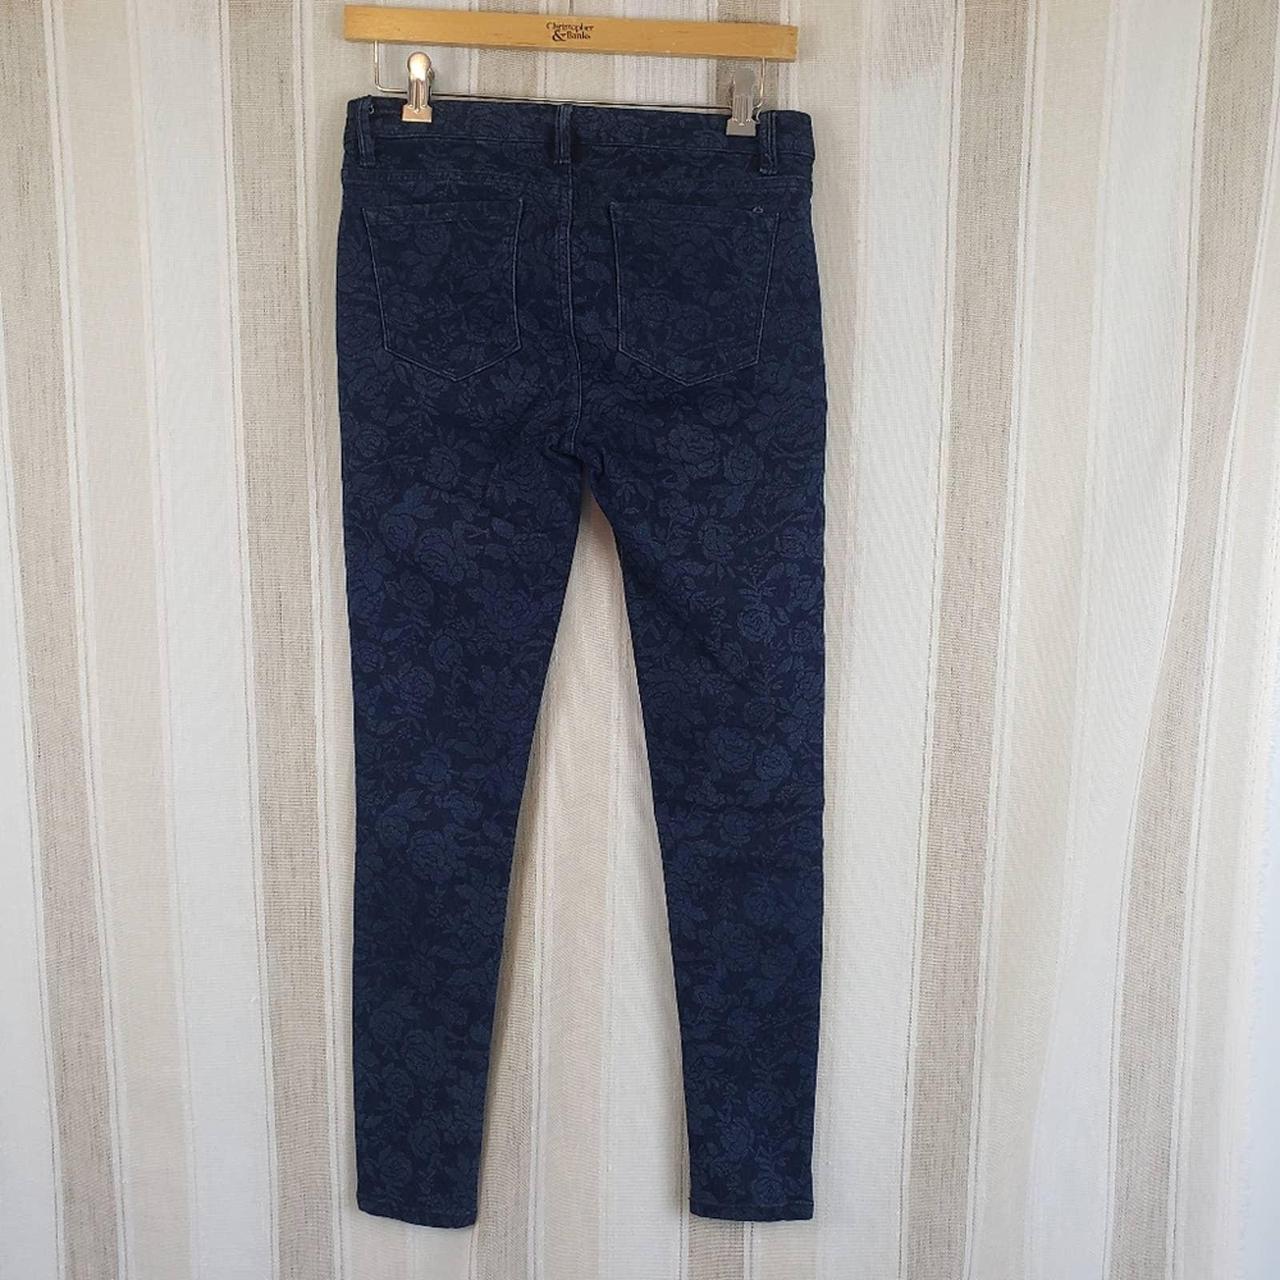 Product Image 4 - Harper Midrise Floral Skinny Jeans